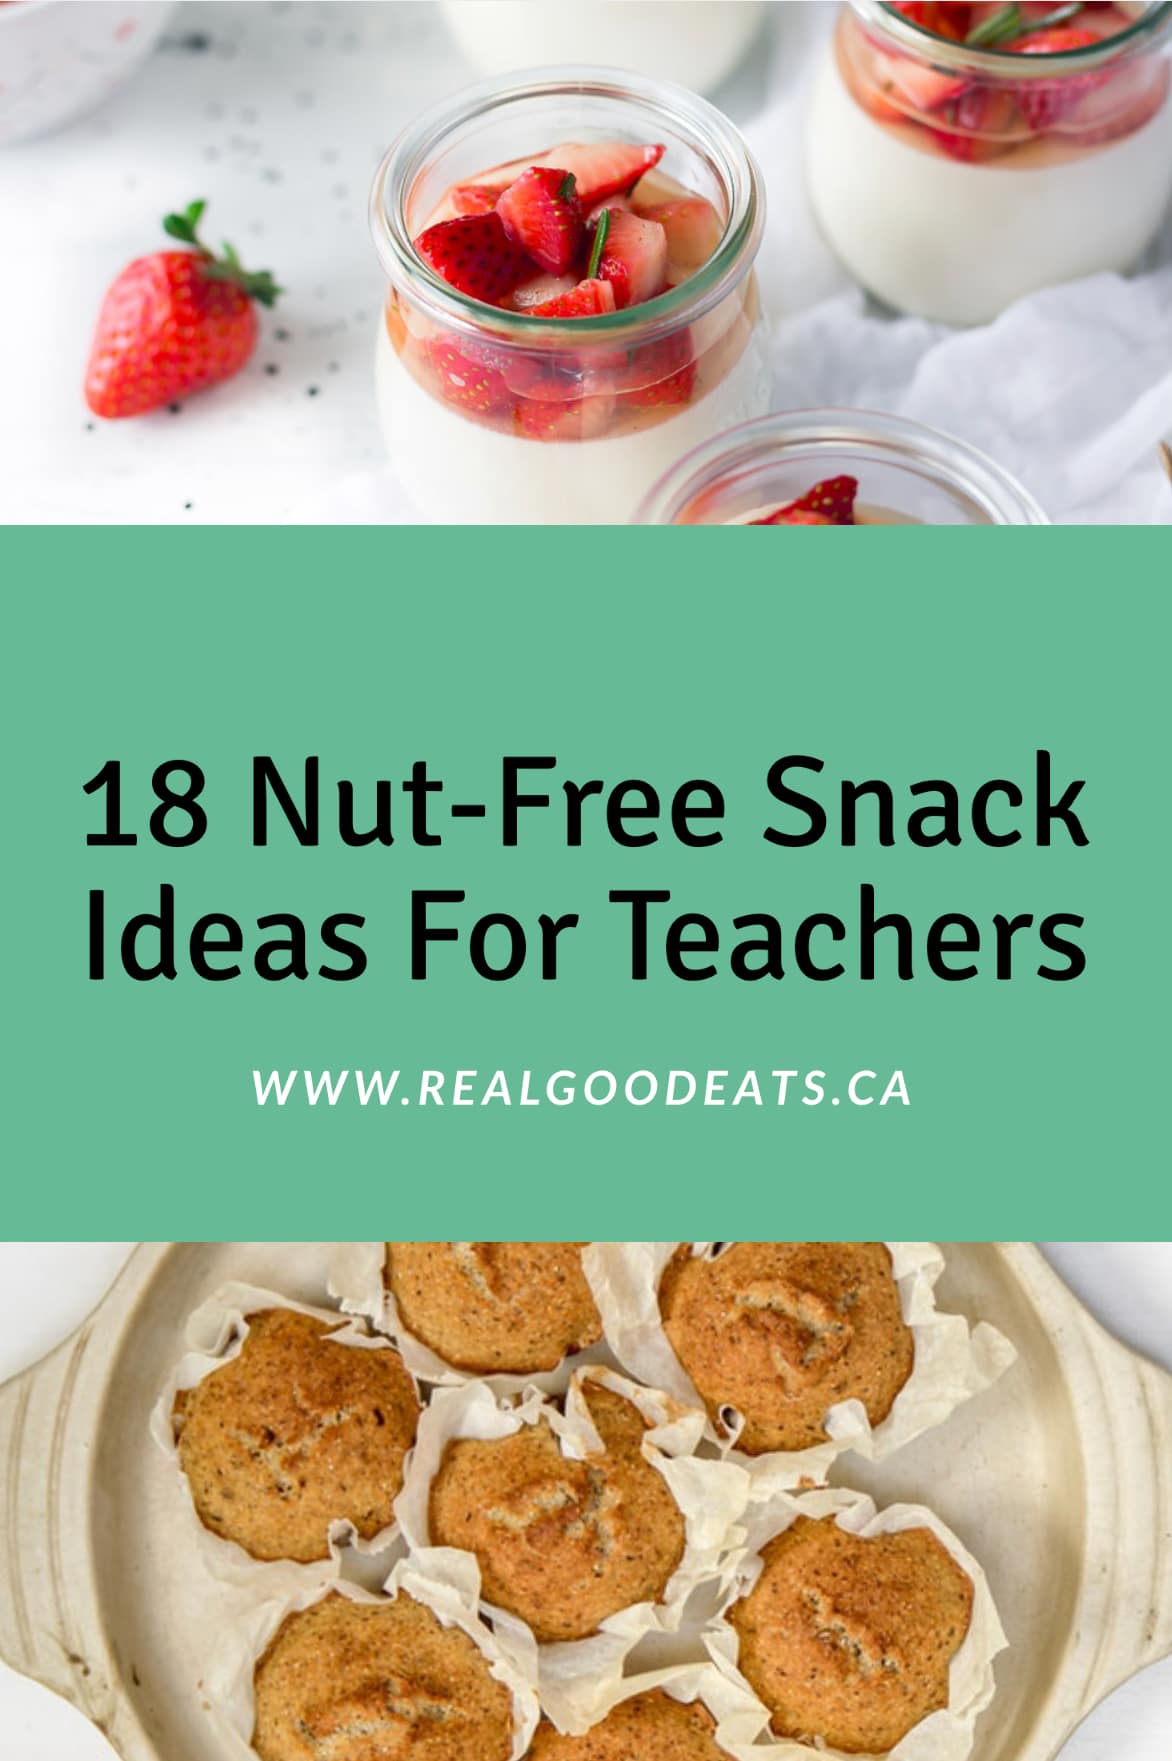 18 nut-free snack ideas for teachers blog graphic